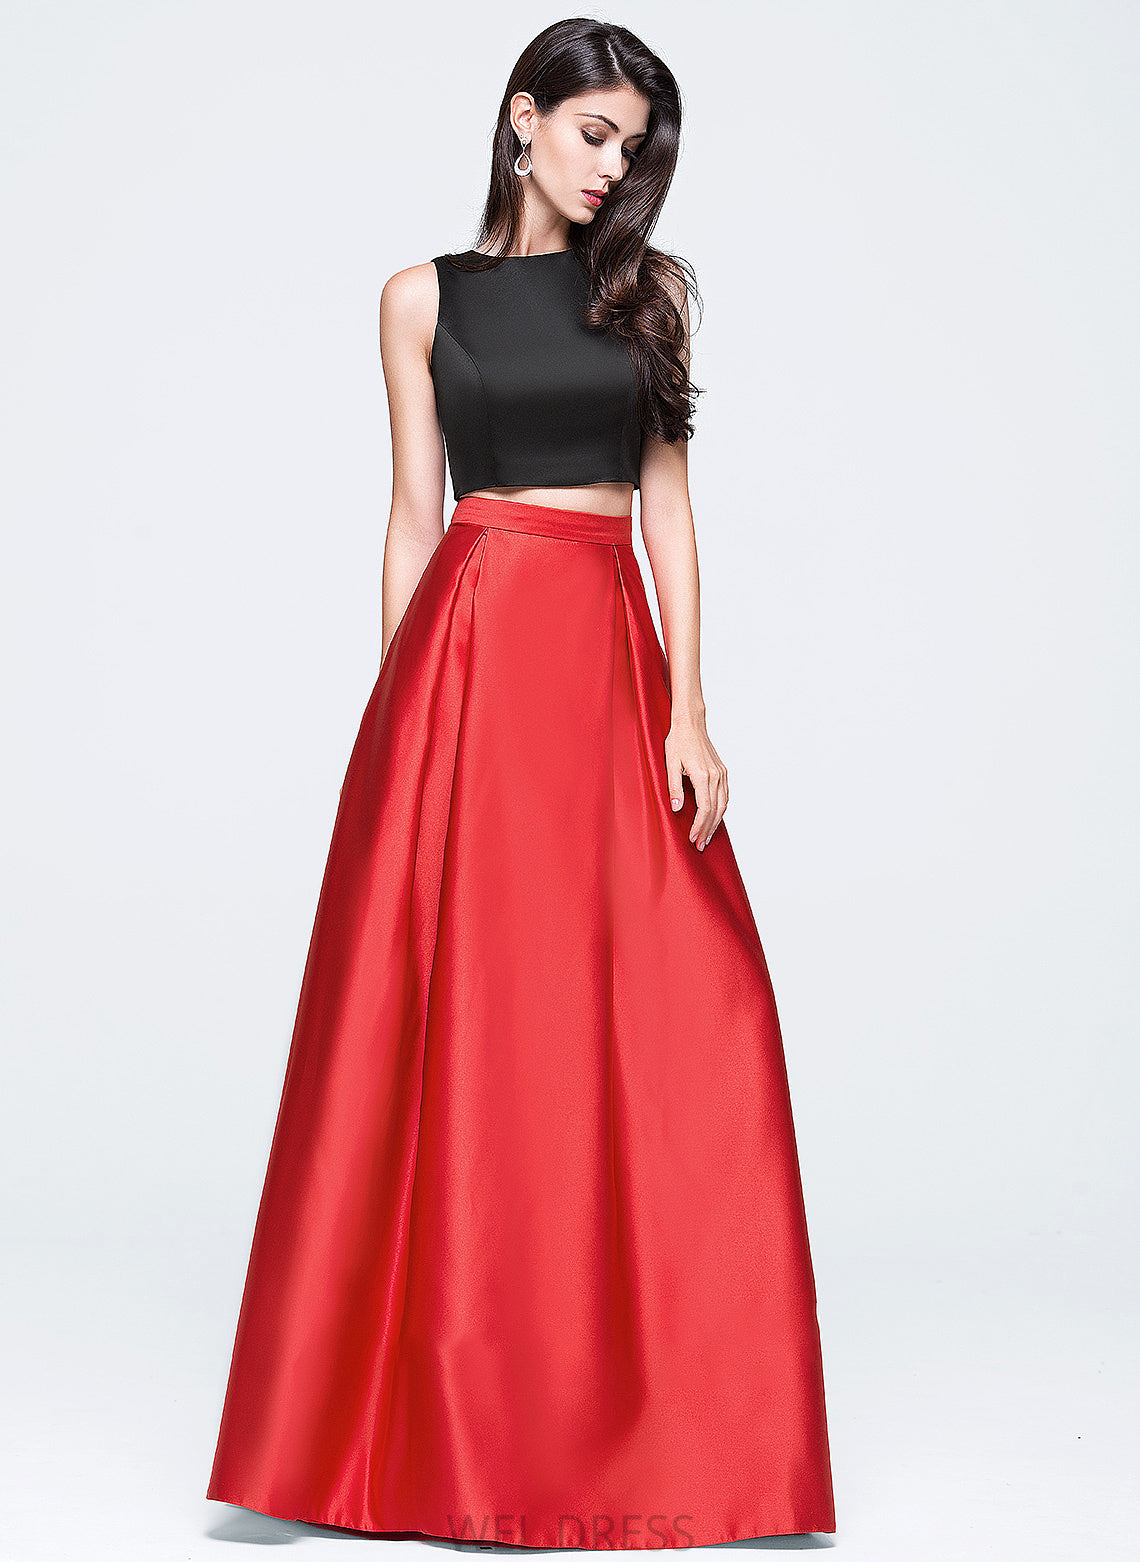 Scoop Pockets With Aliana Prom Dresses Ball-Gown/Princess Satin Floor-Length Neck